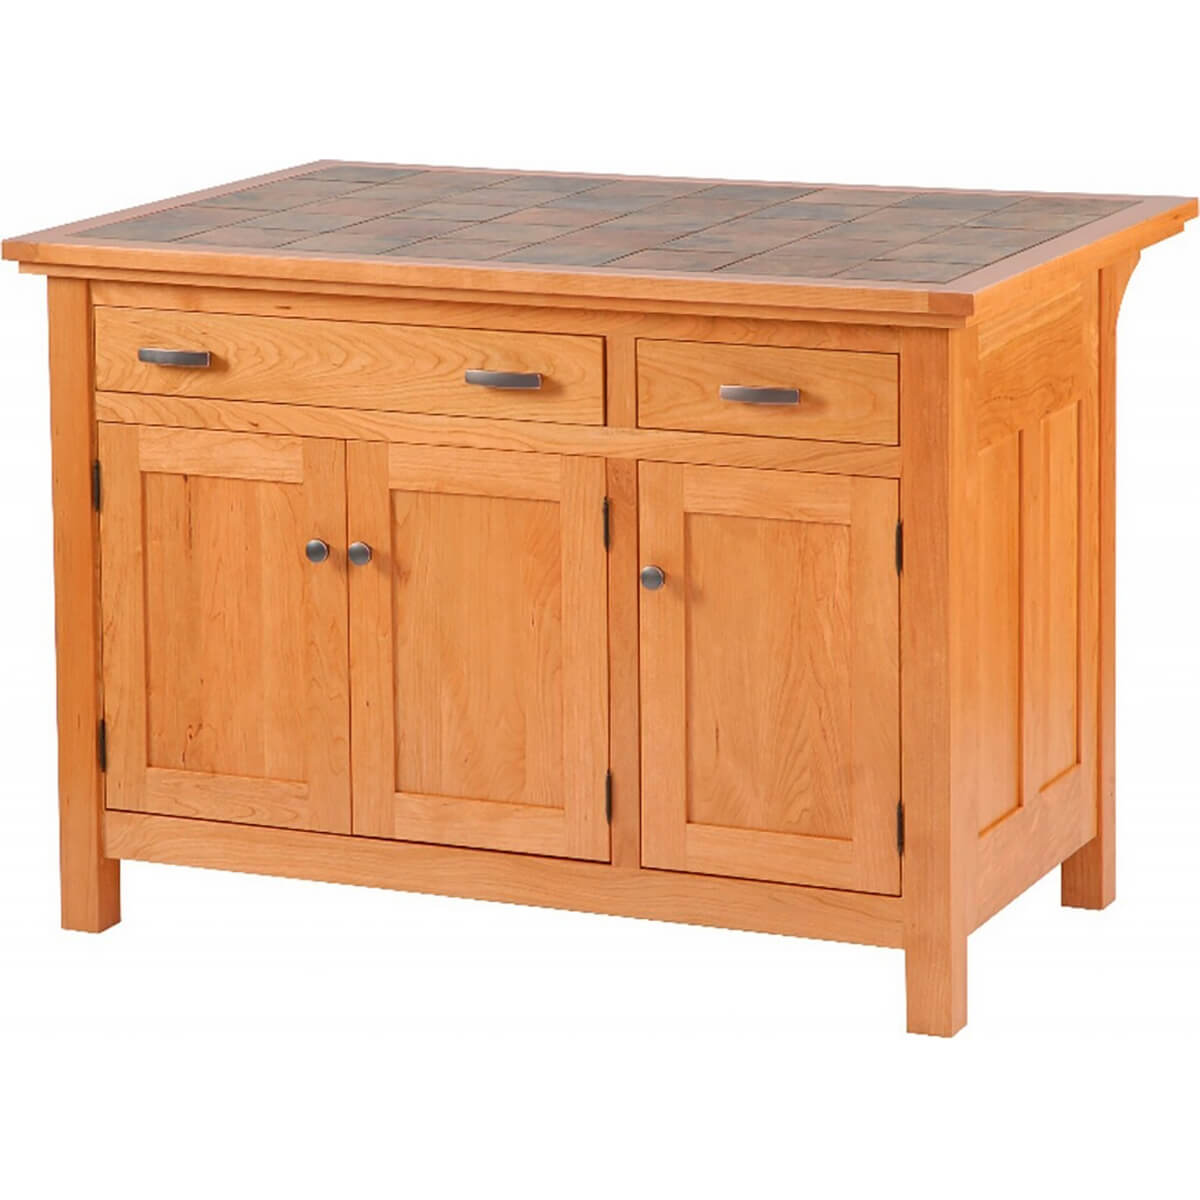 Read more about the article Brookline Mission Kitchen Island Cabinet